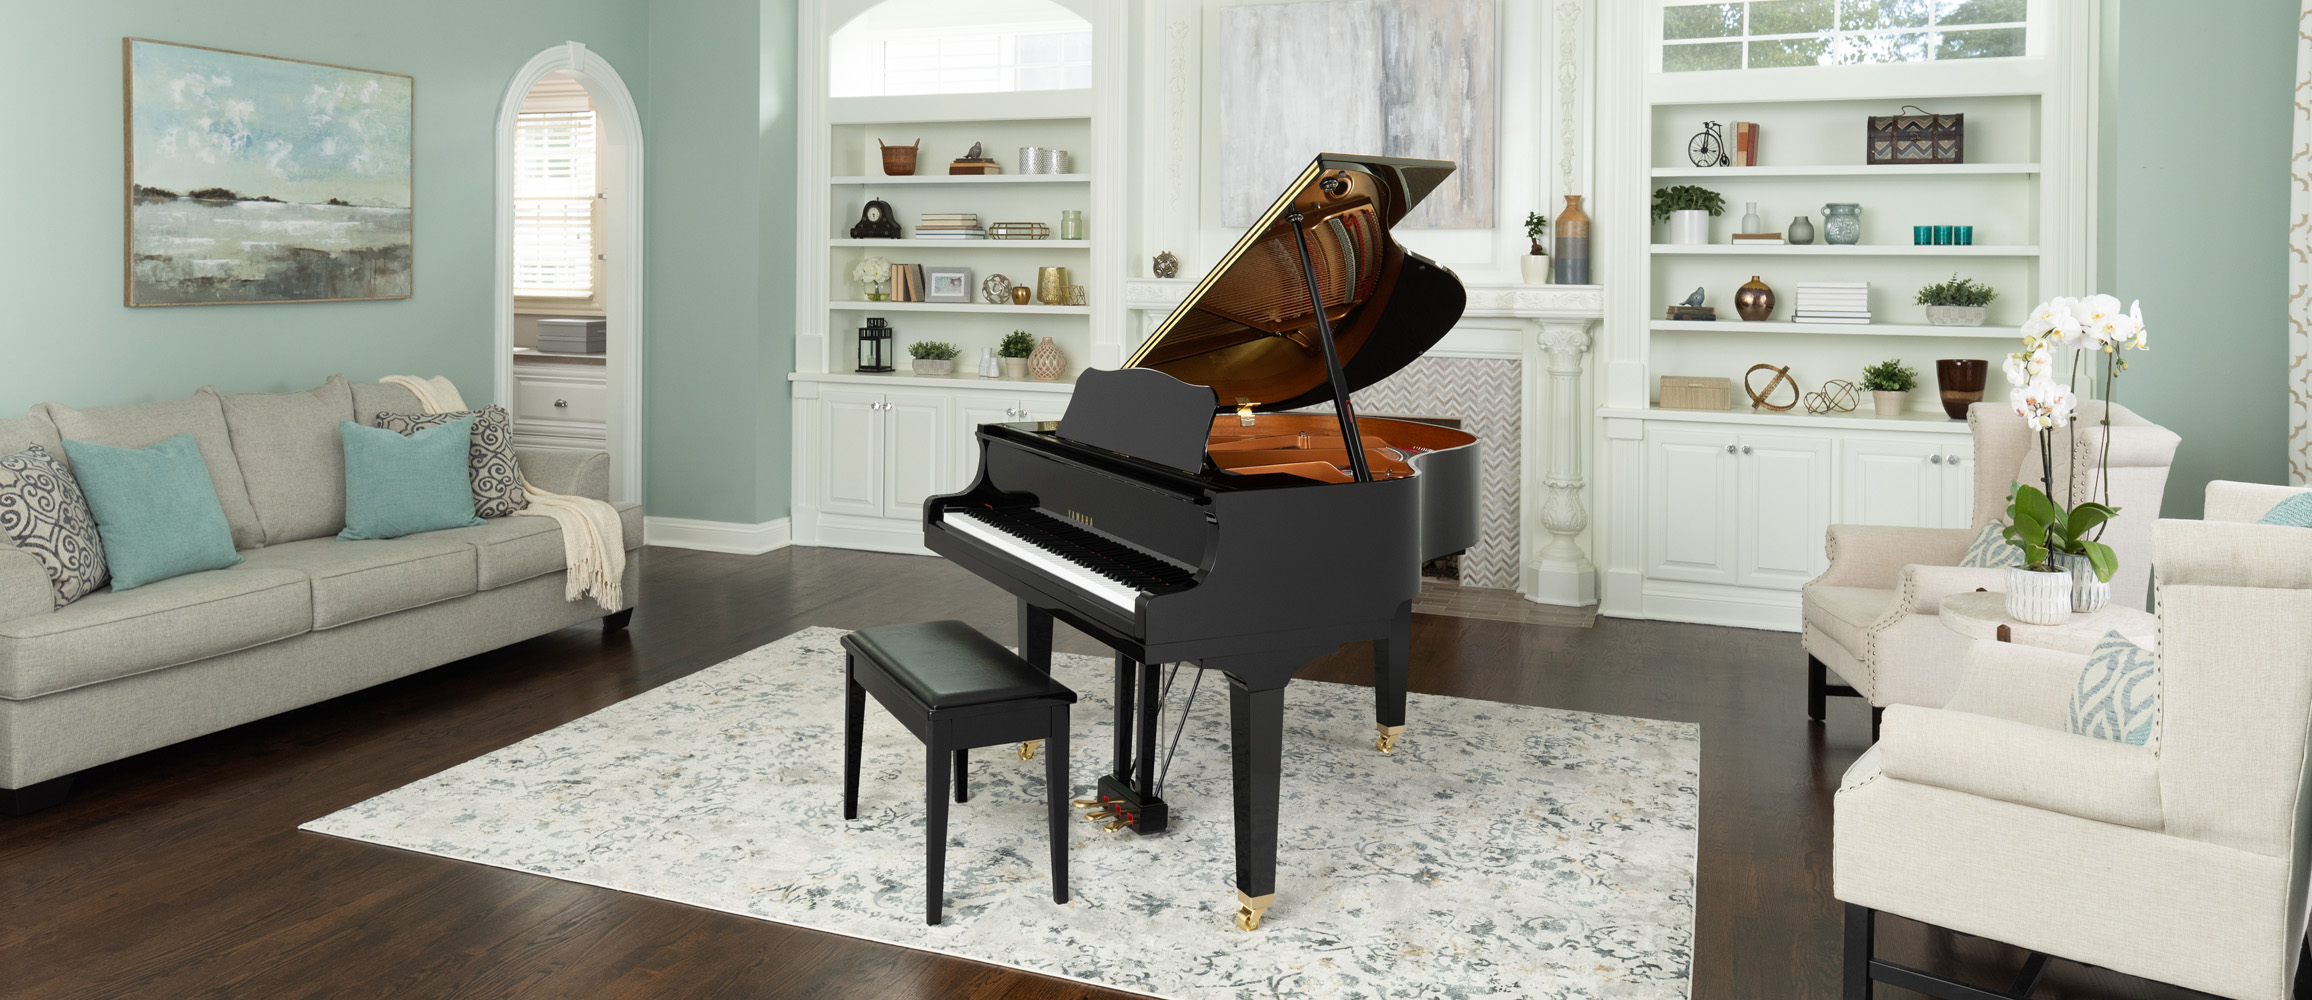 GB1K - Grand Pianos - Pianos - Musical Instruments - Products